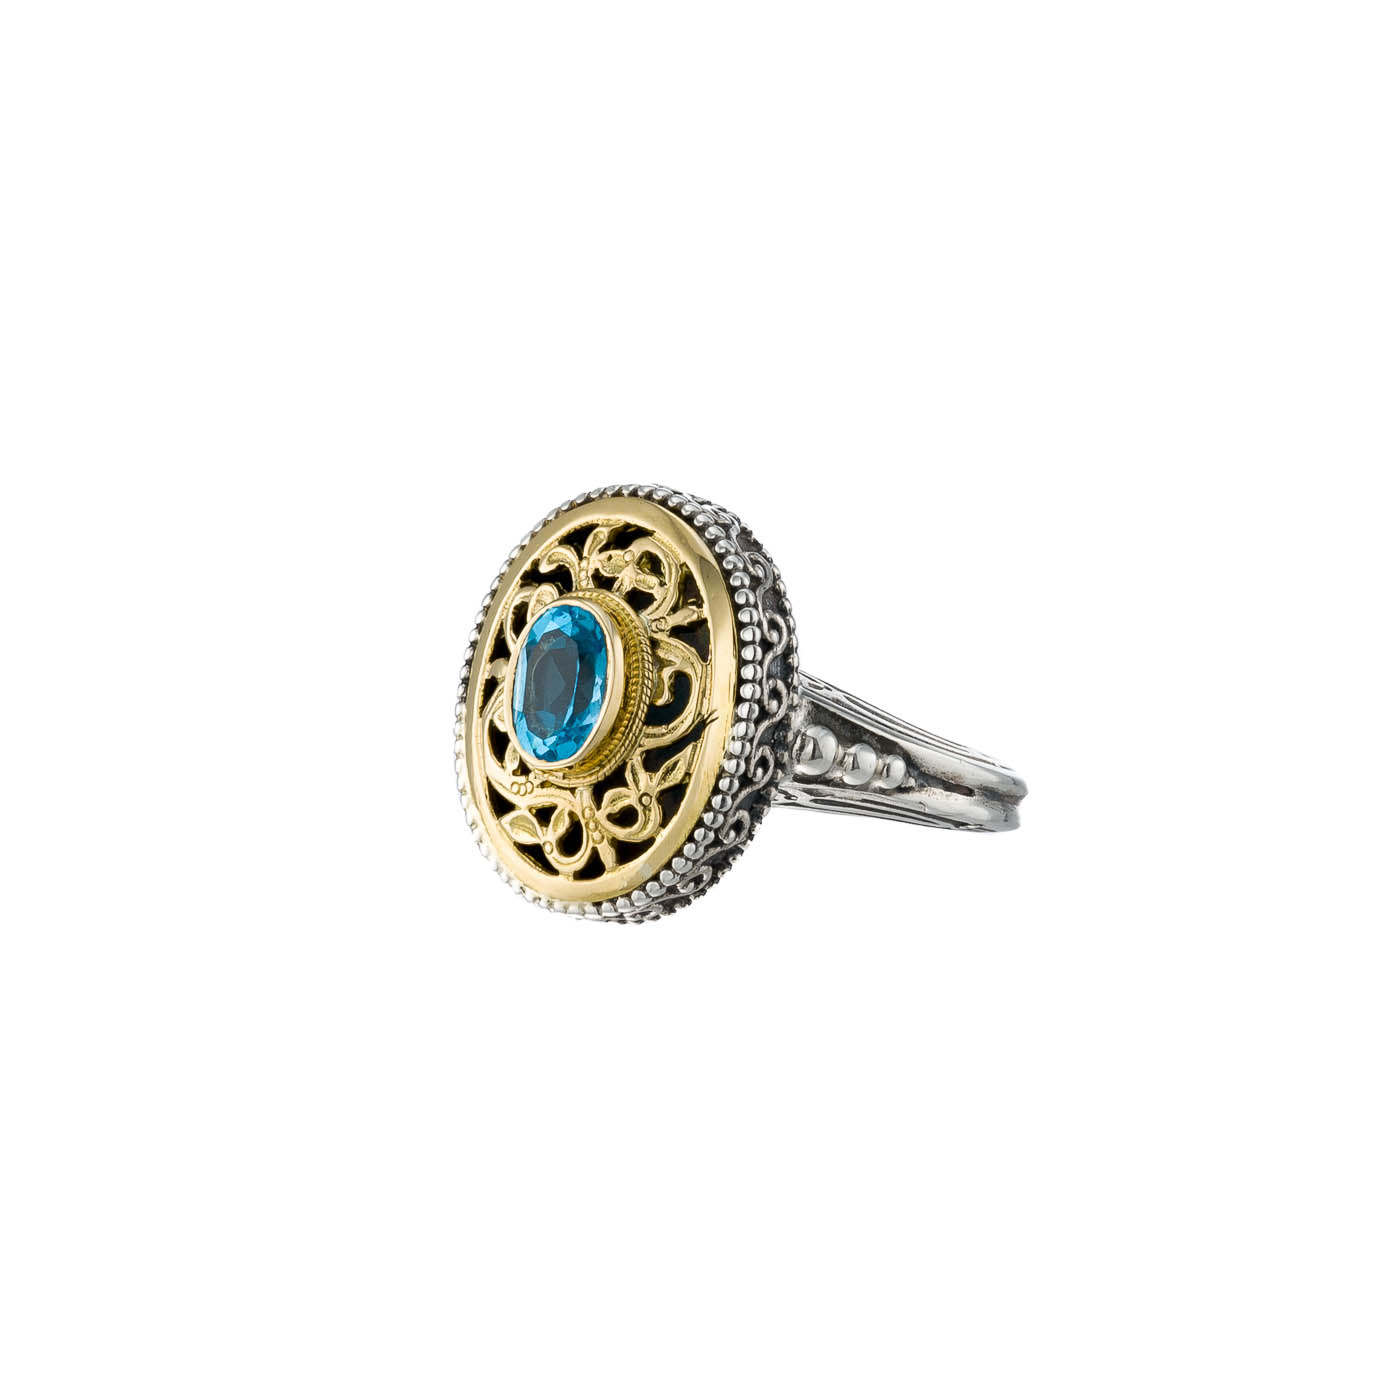 Garden Shadows oval ring in 18K Gold and Sterling Silver with blue topaz